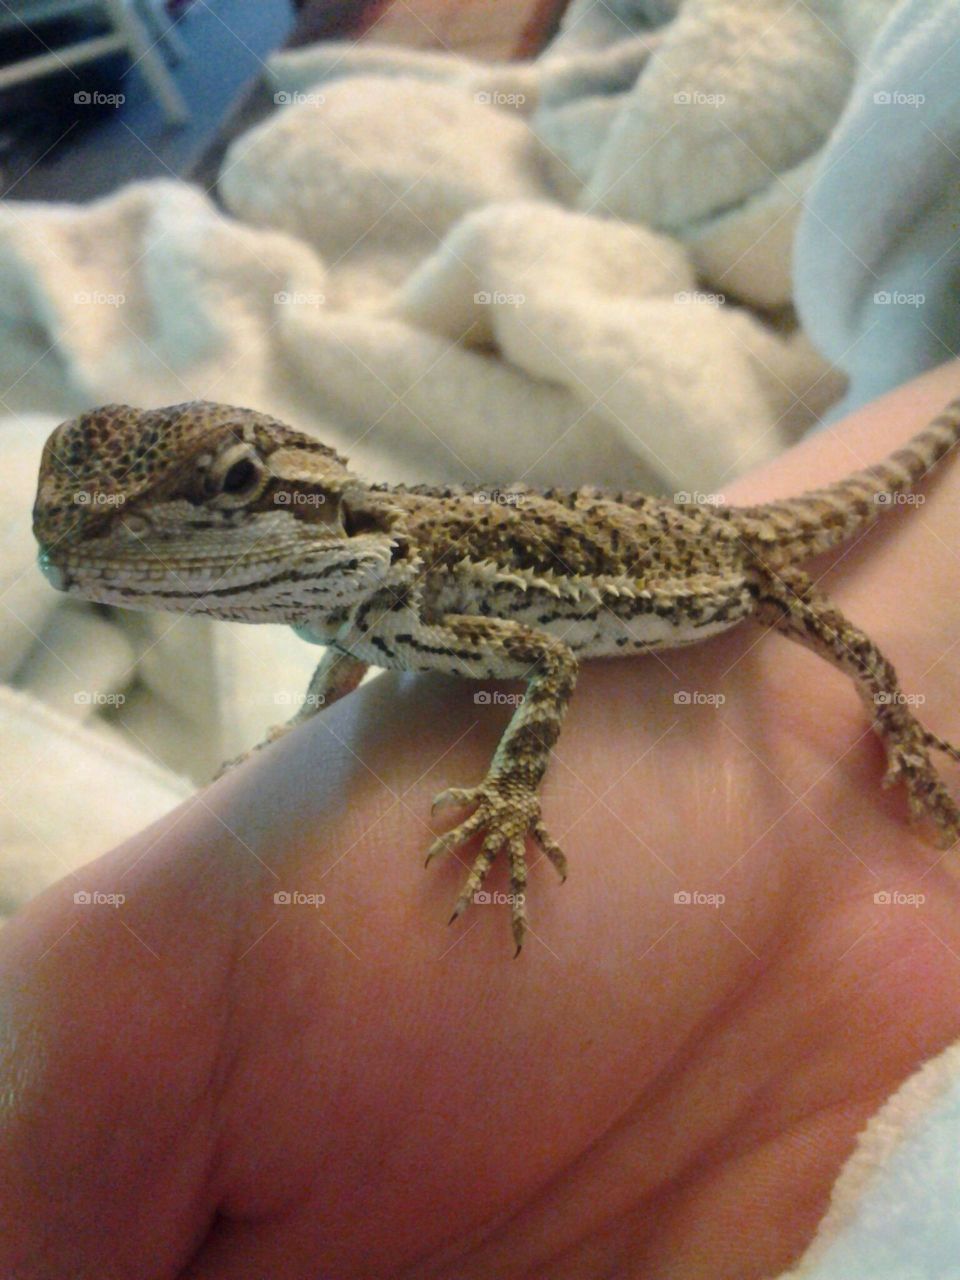 Smaug as a Baby. Smaug the Terrible, Chiefest and Greatest of Calamities, as a one month old bearded dragon